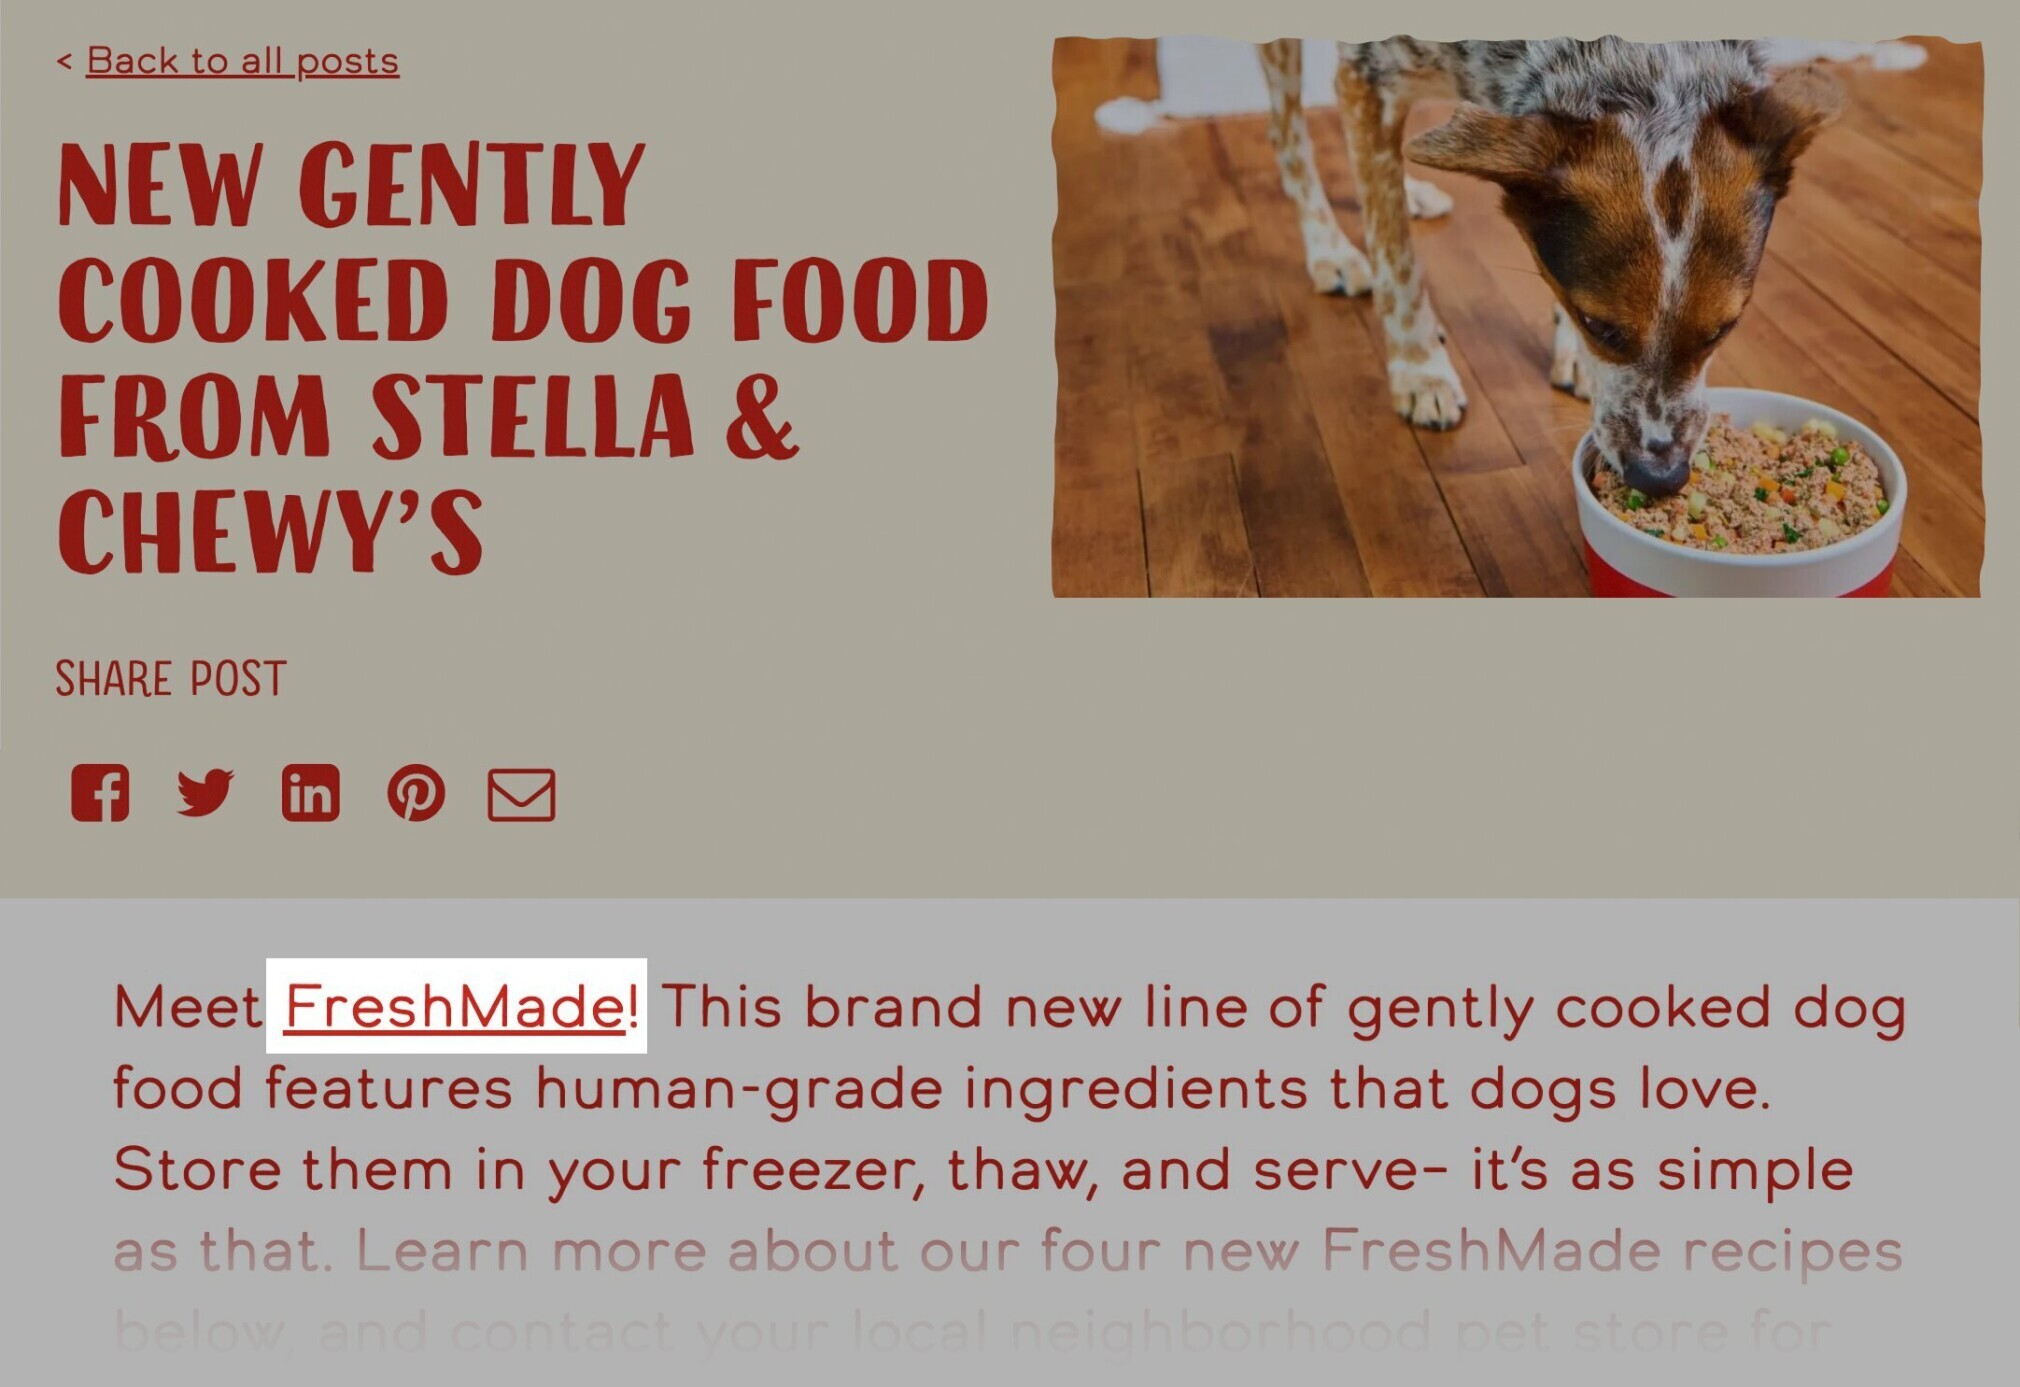 Stella & Chewy's uses that blog post to pass authority to their FreshMade Gently-Cooked Dog Food product page